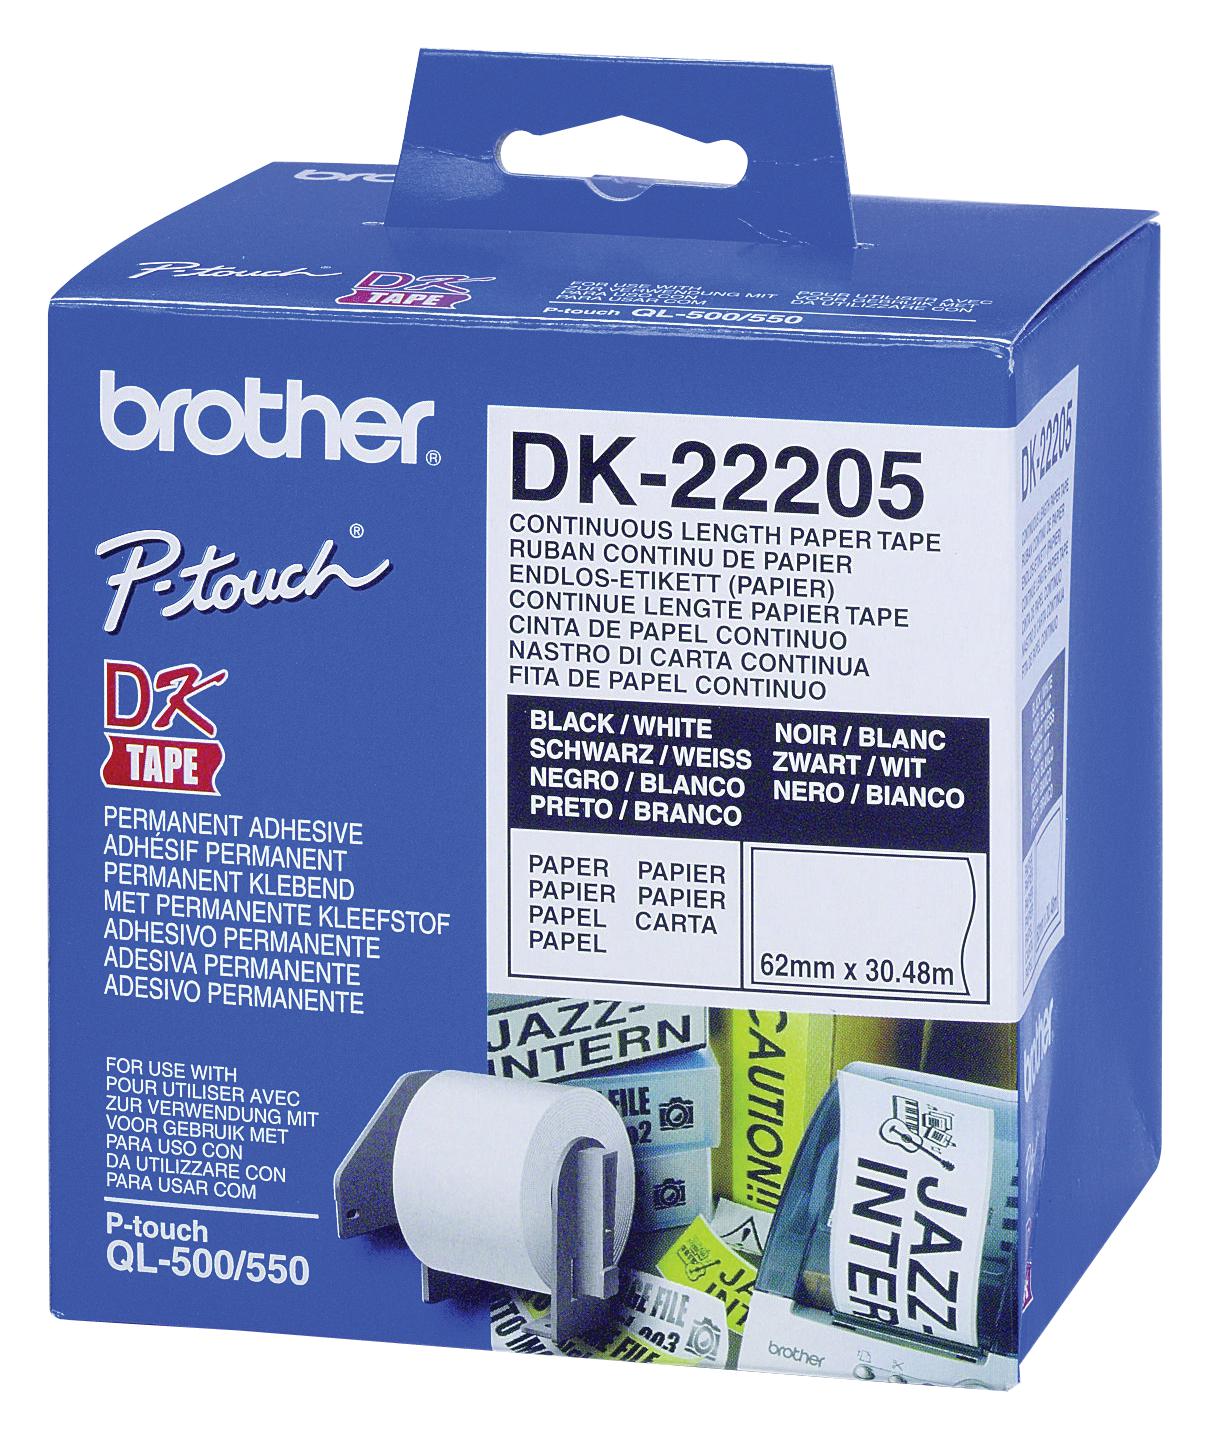 Brother Dk22205 Tape, Continuous Paper, 62mm